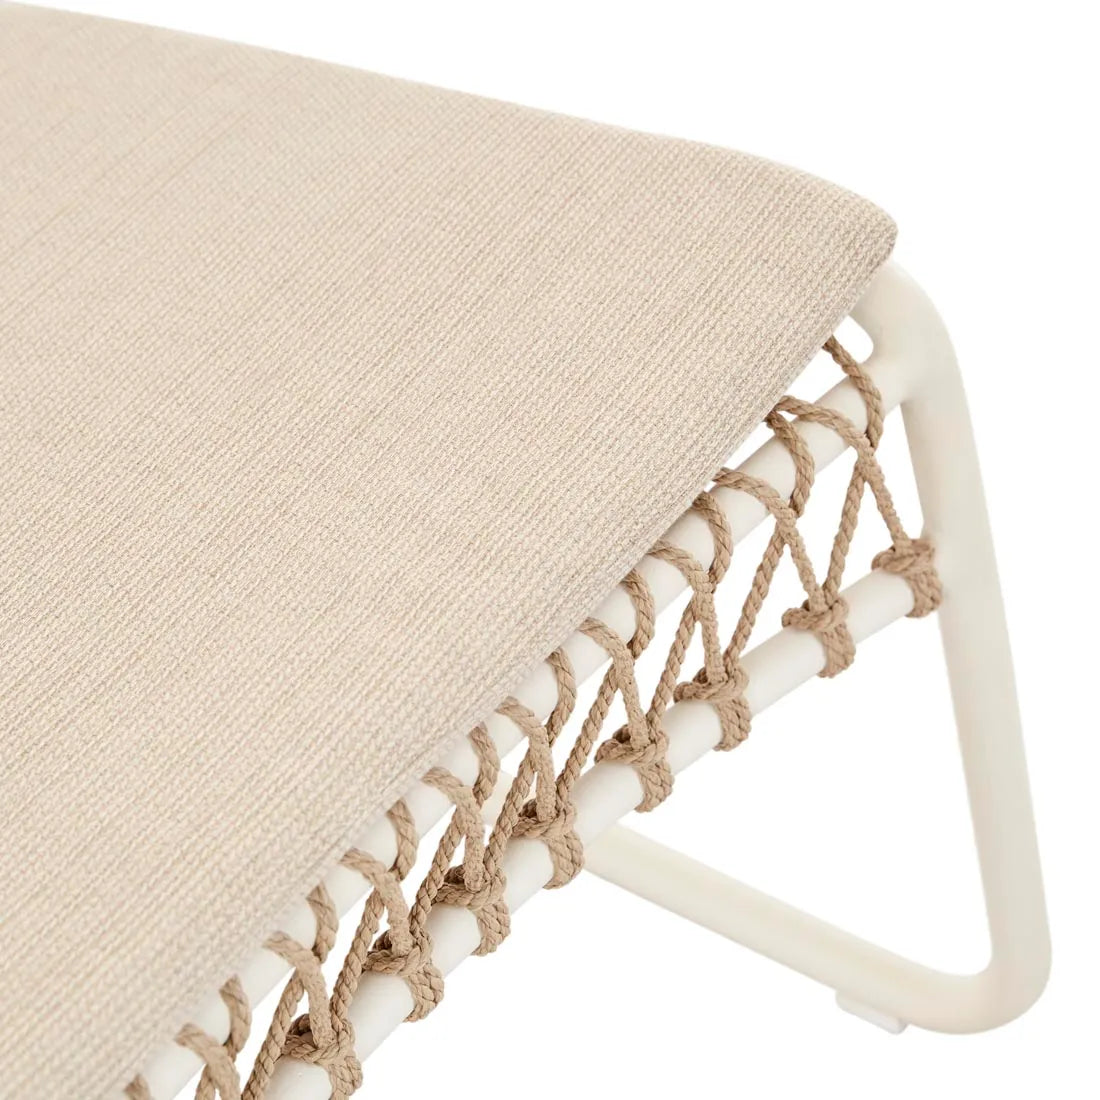 Normandy Twist Occasional Chair - Coastal Living